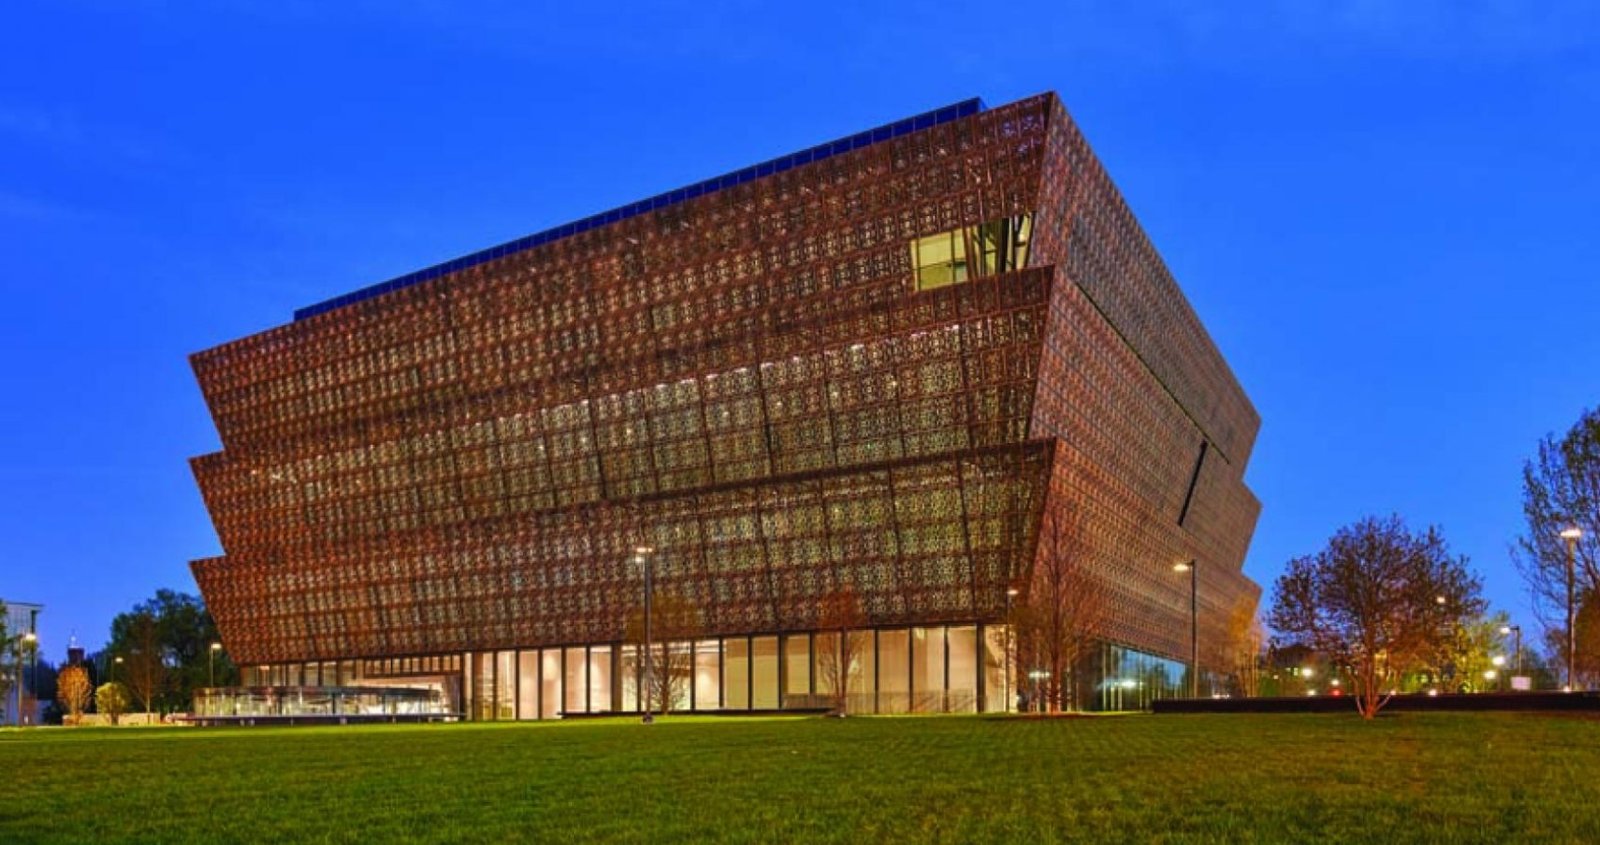 The-National-Museum-of-African-American-History-and-Culture